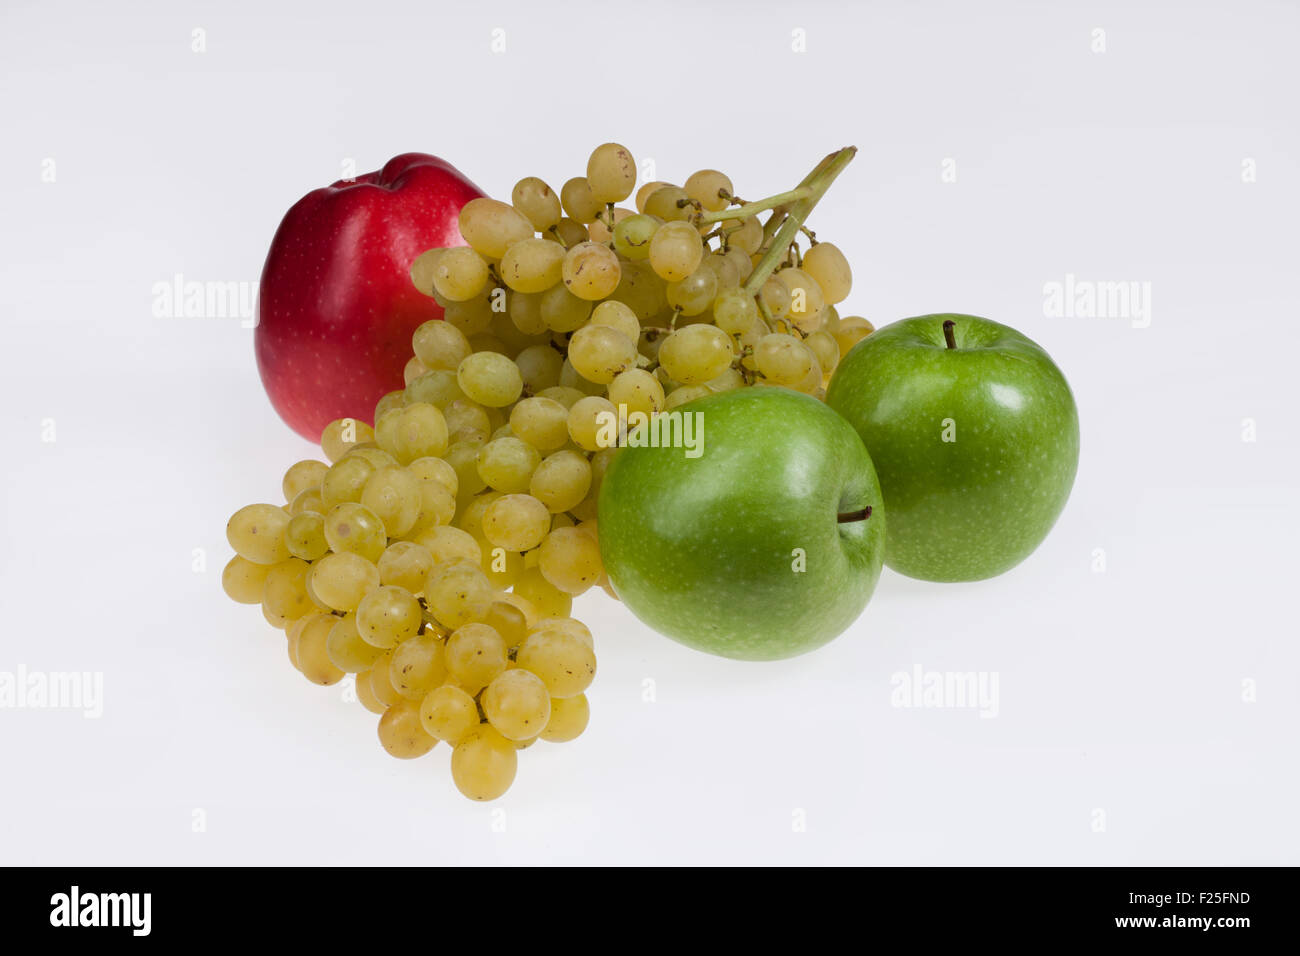 isolated backgrounds berry branch group grape apple green fruit food product close up macro studio table fresh freshness dessert Stock Photo